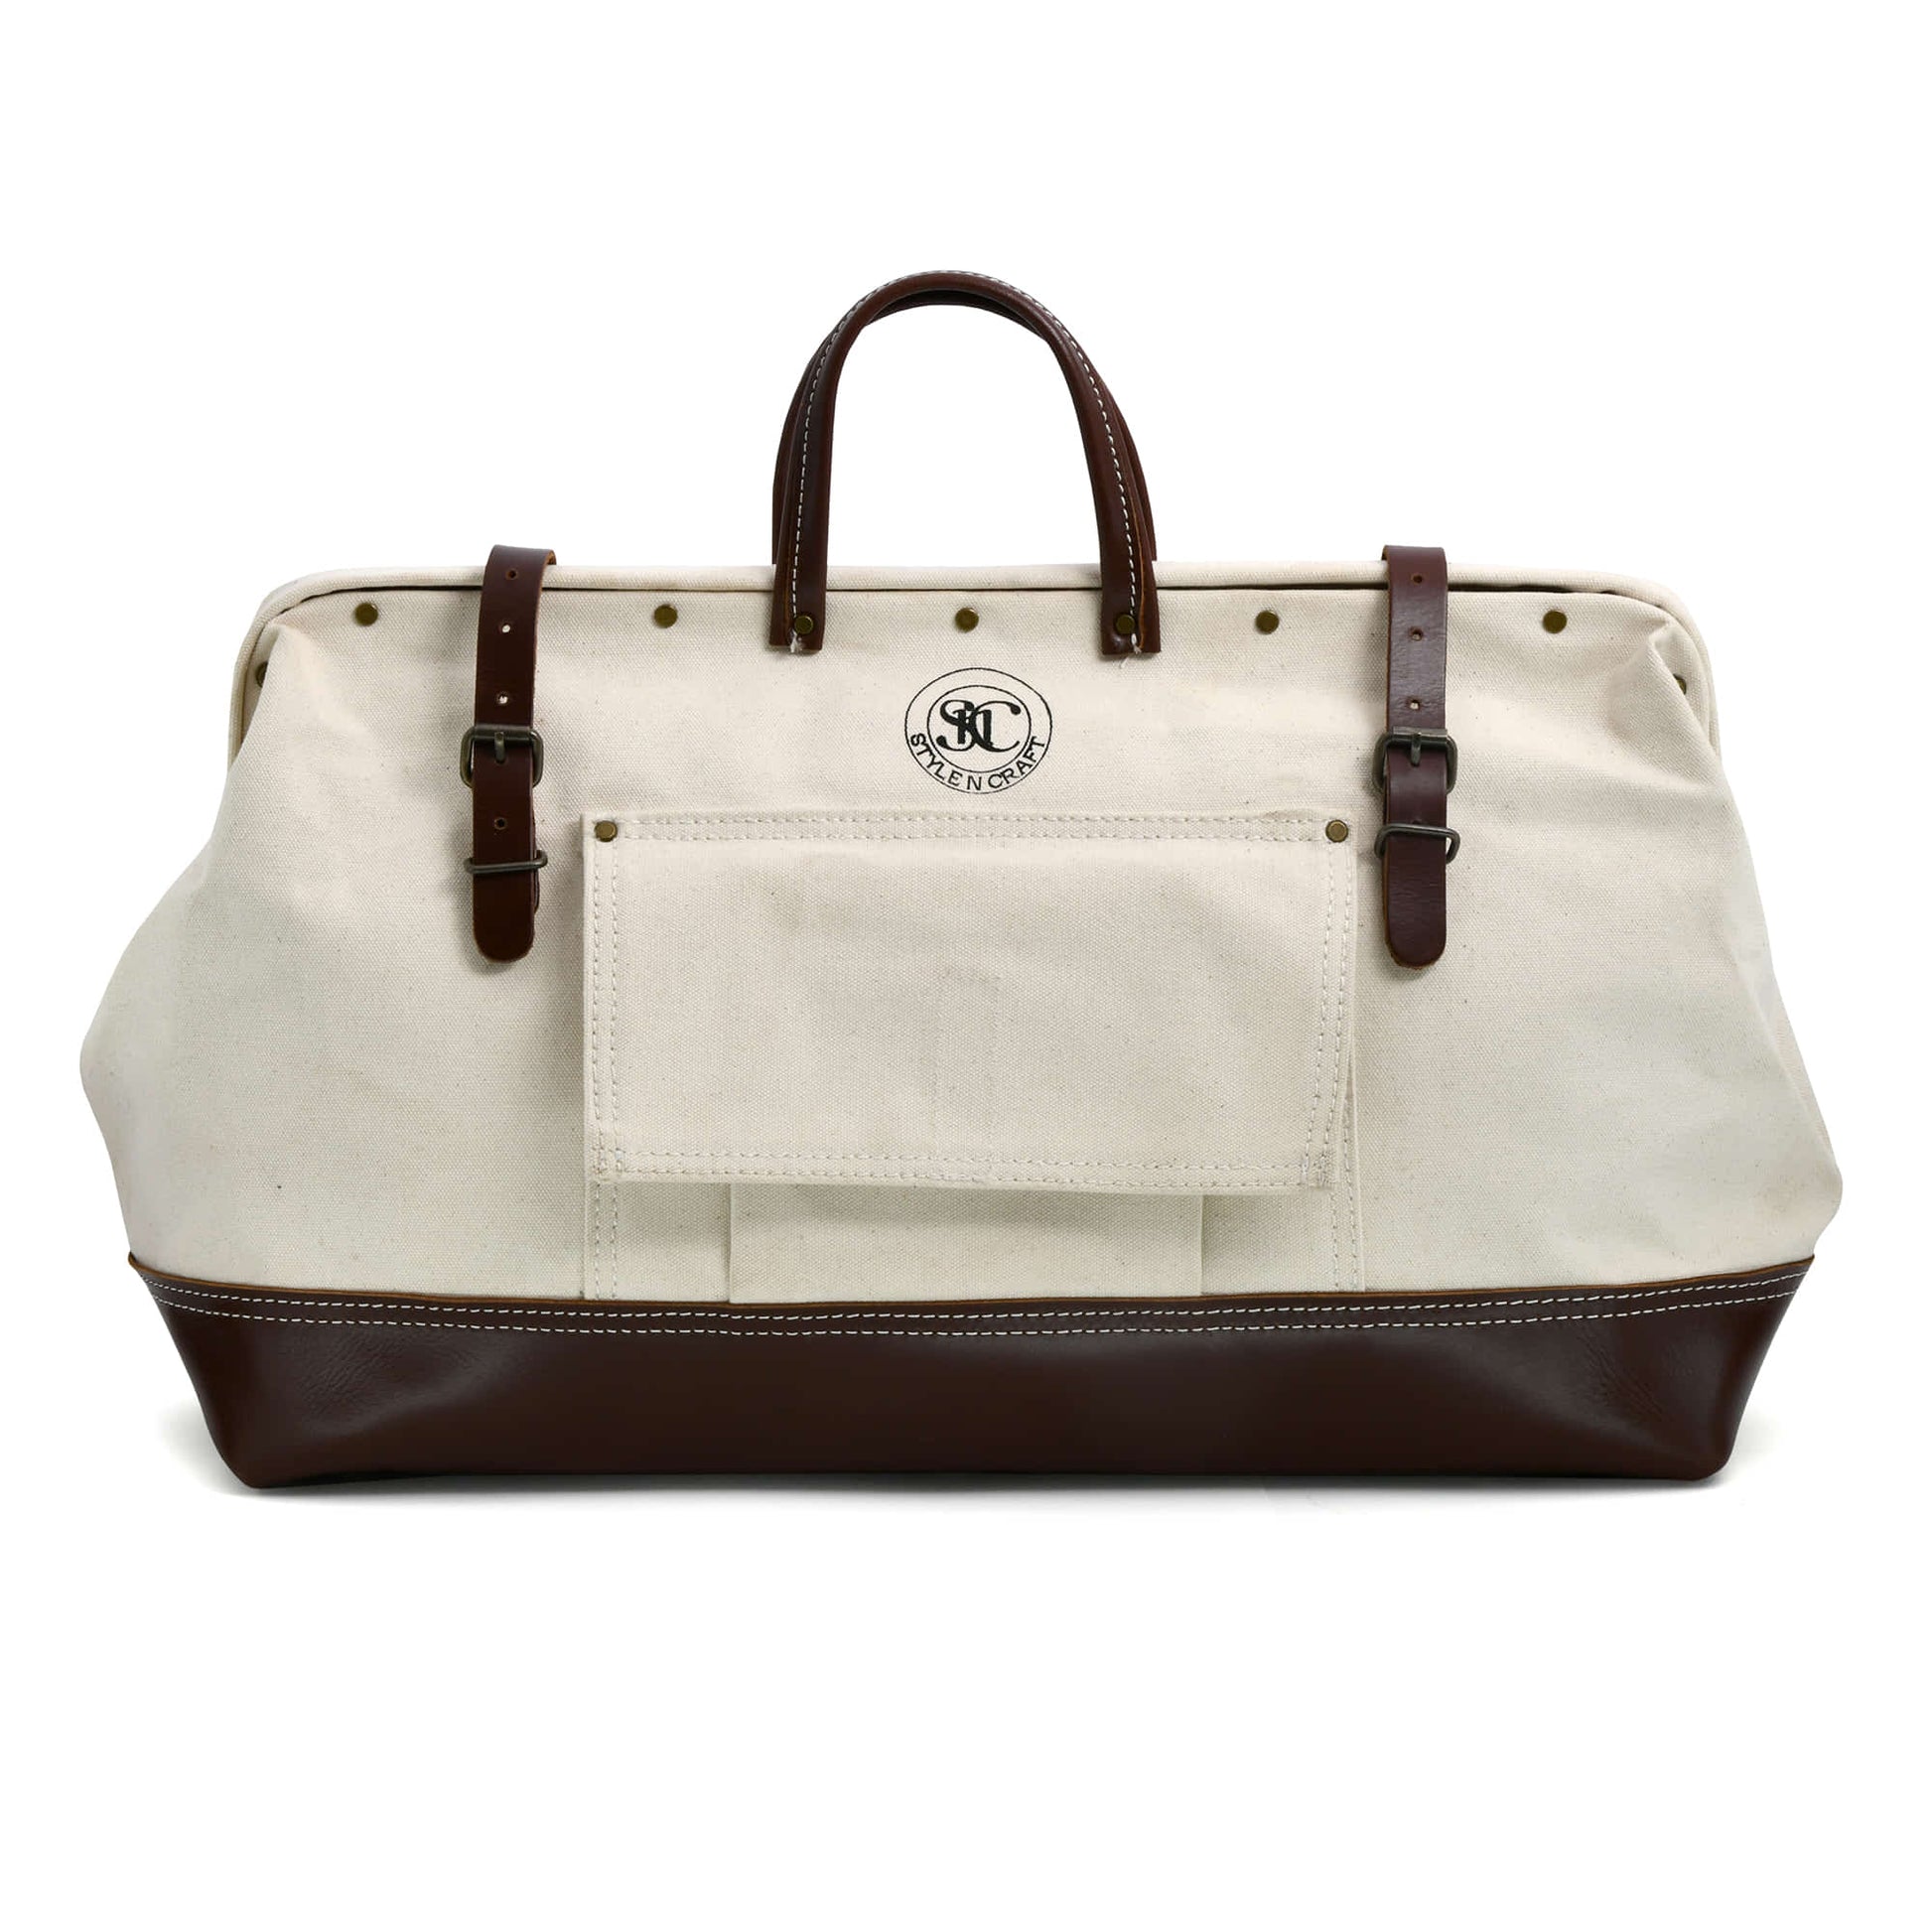 Style n Craft 97517 - 20 Inch Mason's Tool Bag in White Canvas and Dark Tan Full Grain Leather Combination - Front - Straight Closed View Showing the Handles, Leather Closure Straps & the Outside Front Pocket